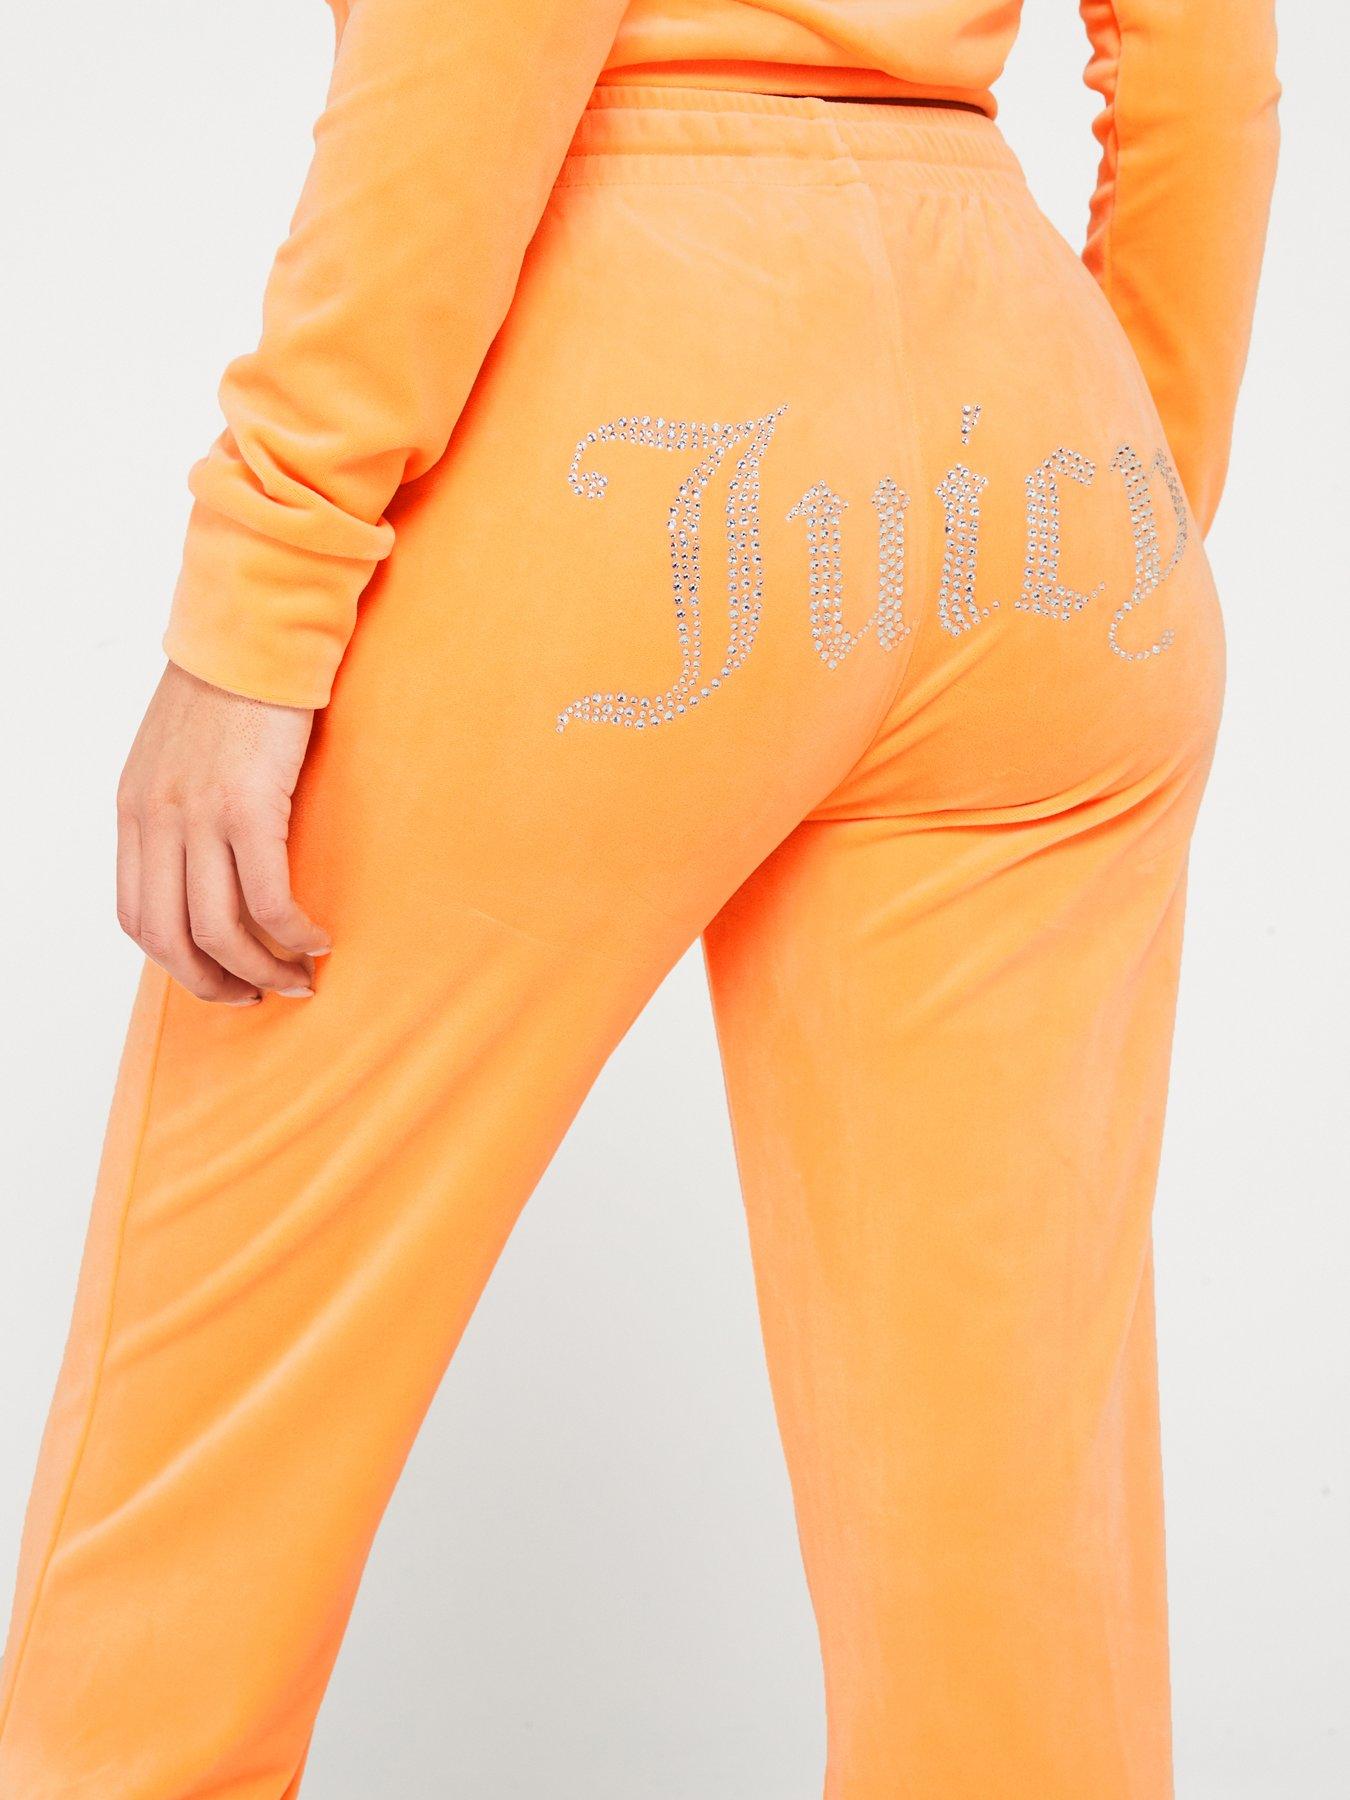 Jewel logo flared knit pant, Juicy Couture